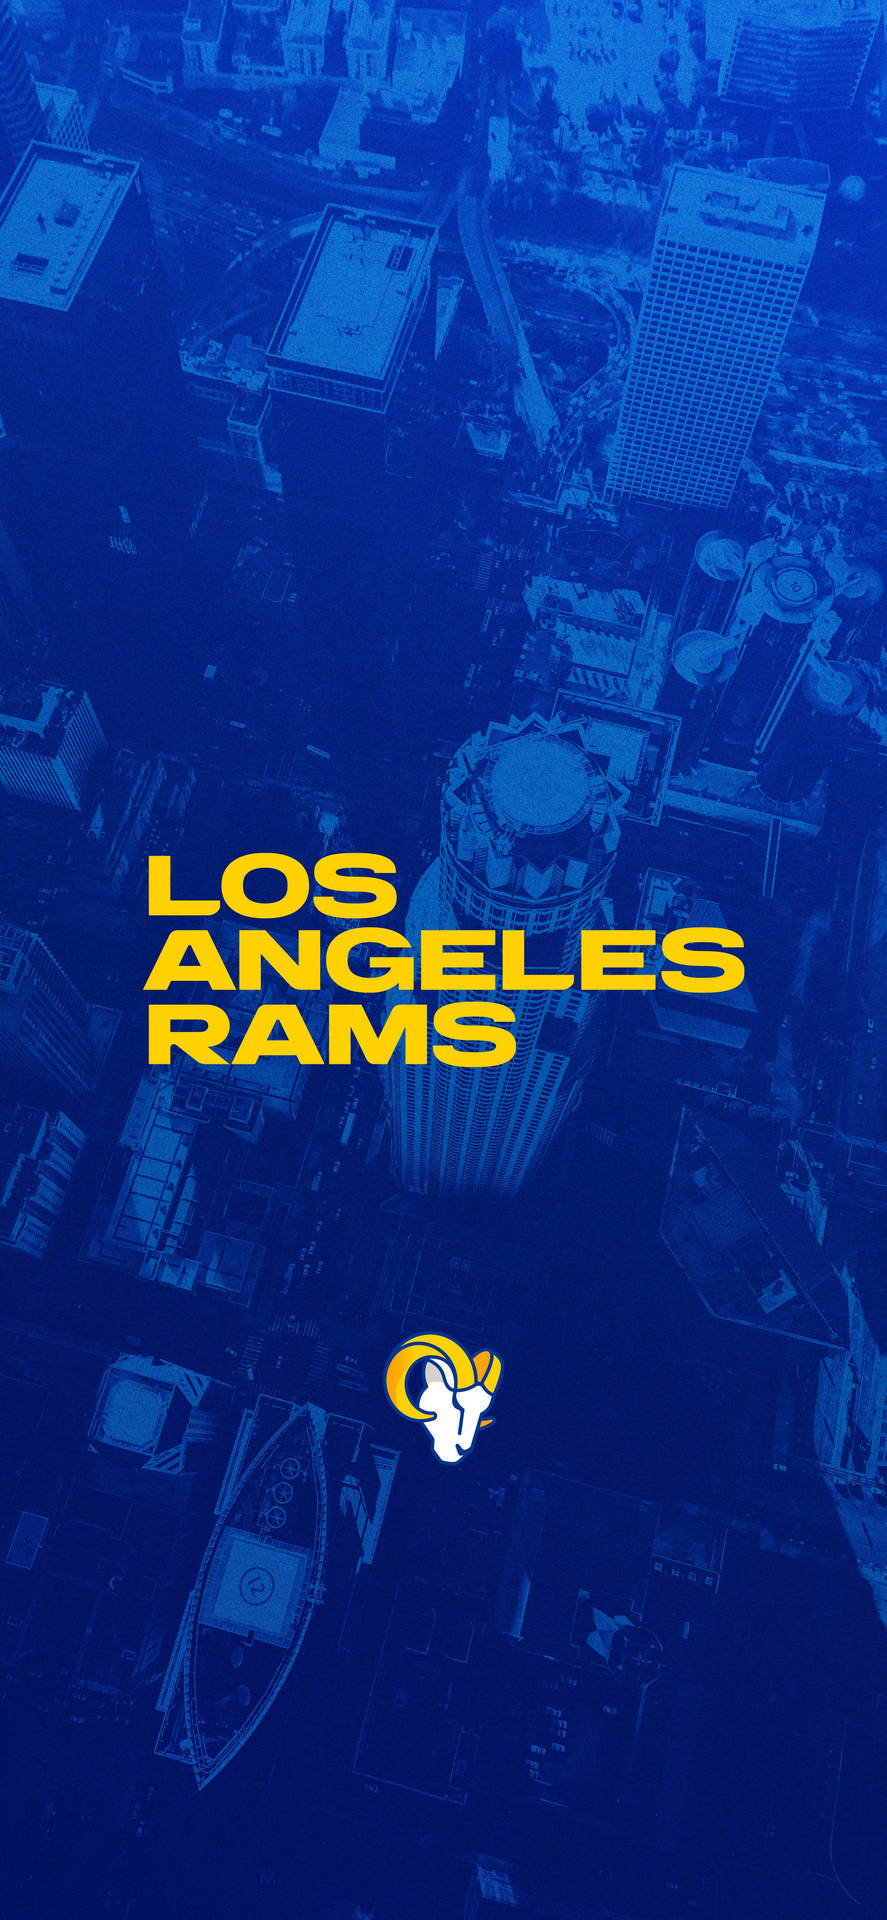 Los Angeles Rams Gold & Blue